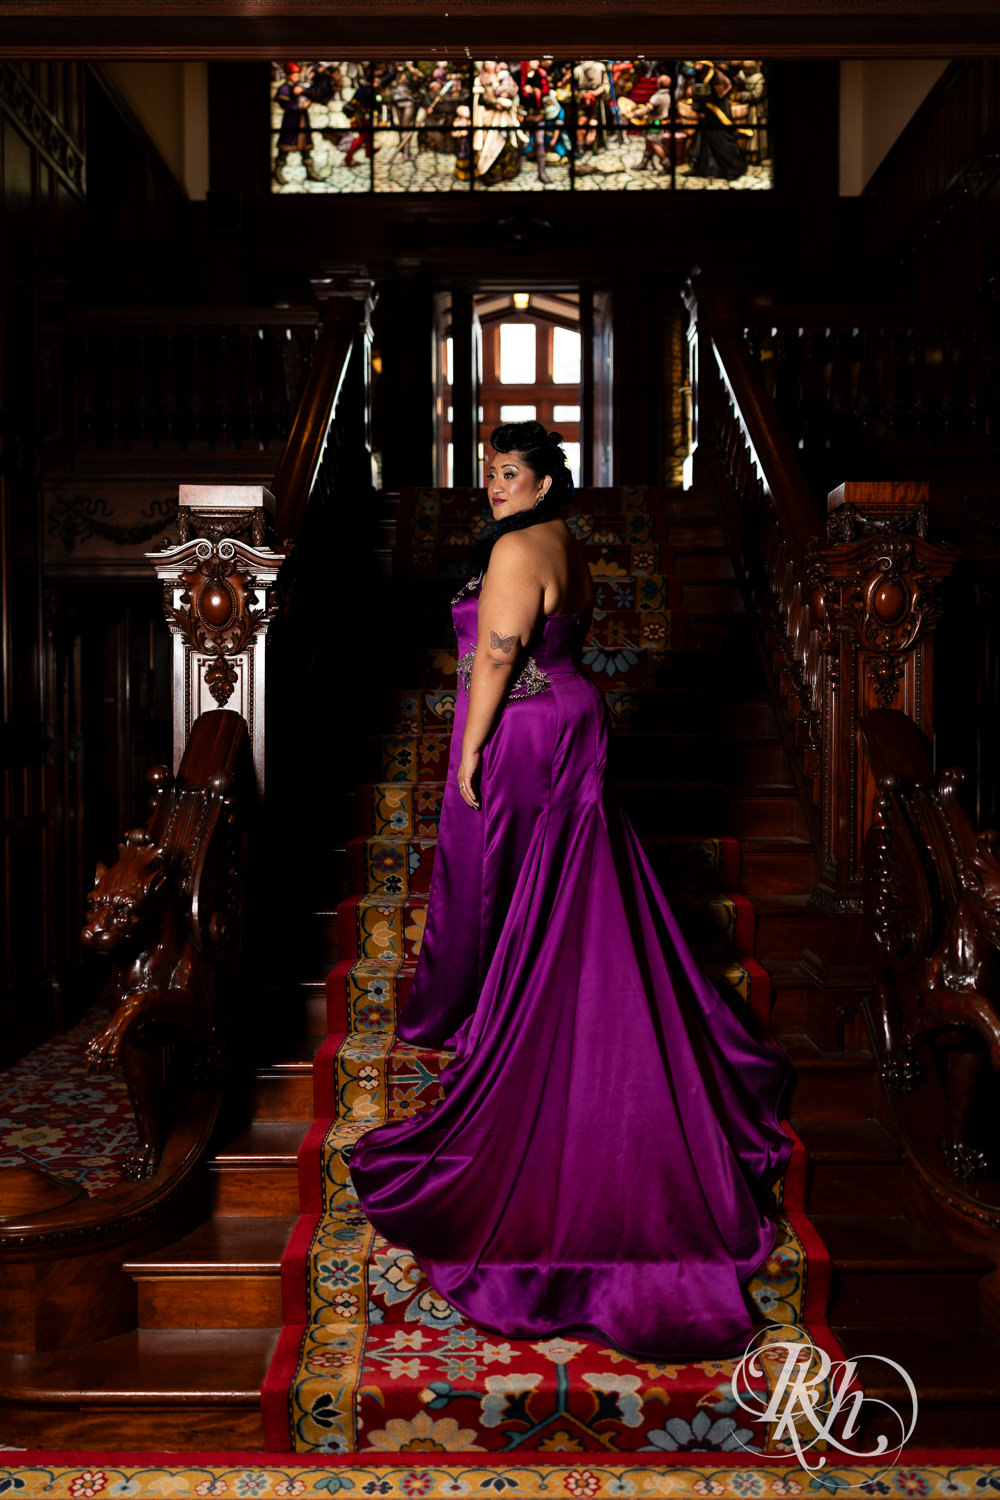 Filipino bride with mohawk dressed in purple wedding dress stands on stairs at American Swedish Institute in Minnesota.